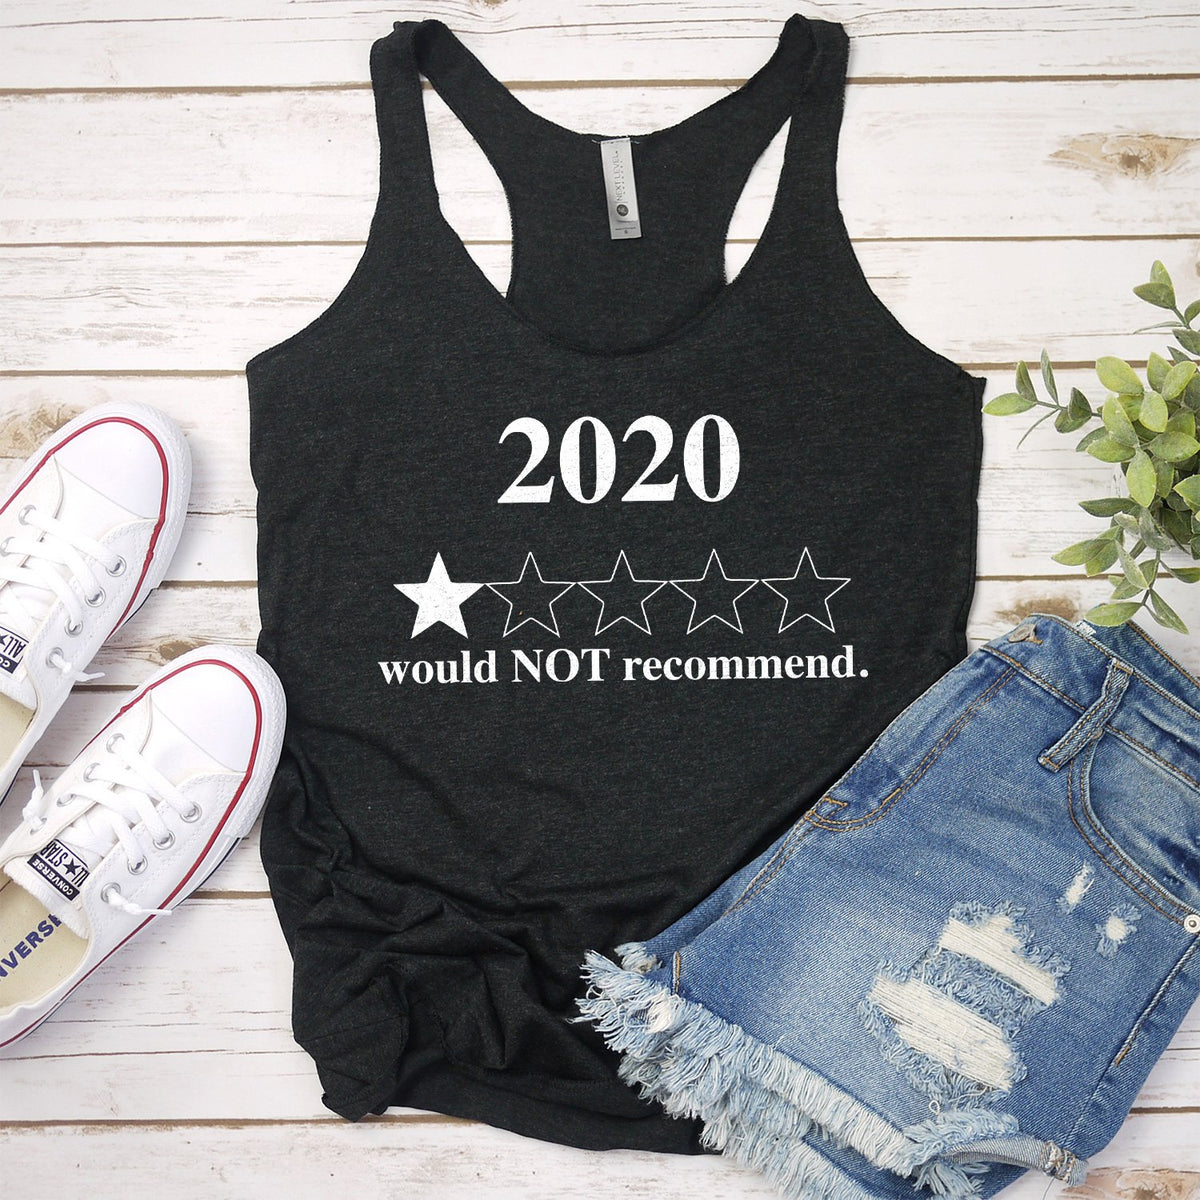 2020 Would Not Recommend - Tank Top Racerback